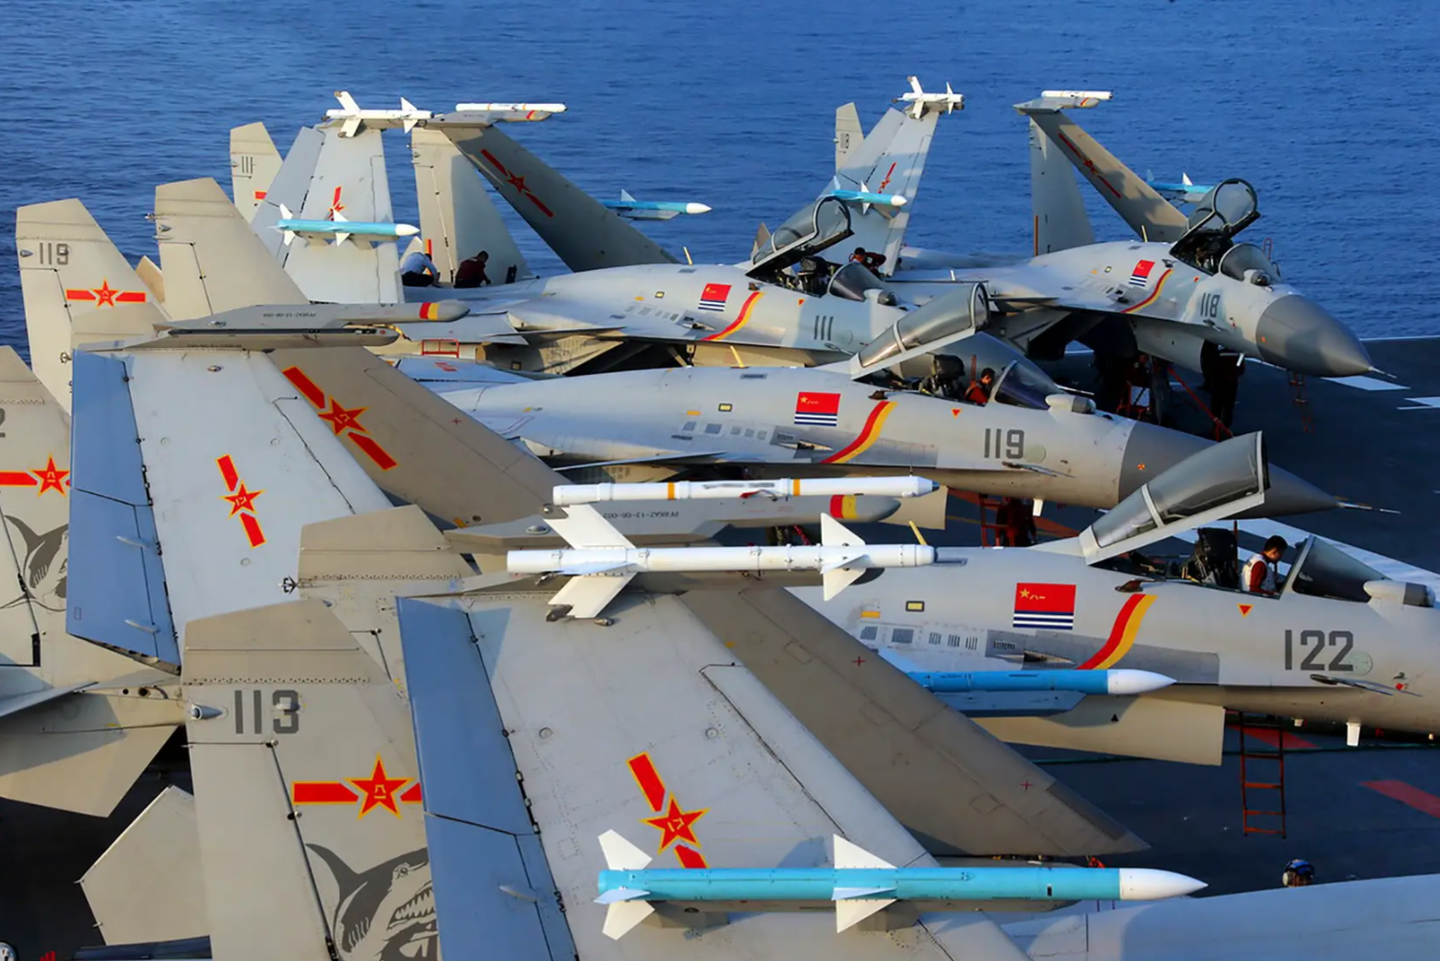 J-15 fighters on the deck of the aircraft carrier&nbsp;<em>Liaoning</em>. The jets are carrying a mix of Chinese-made PL-12 and PL-8 air-to-air missiles, plus air combat maneuvering instrumentation pods.&nbsp;<em>AFP via Getty Images</em>